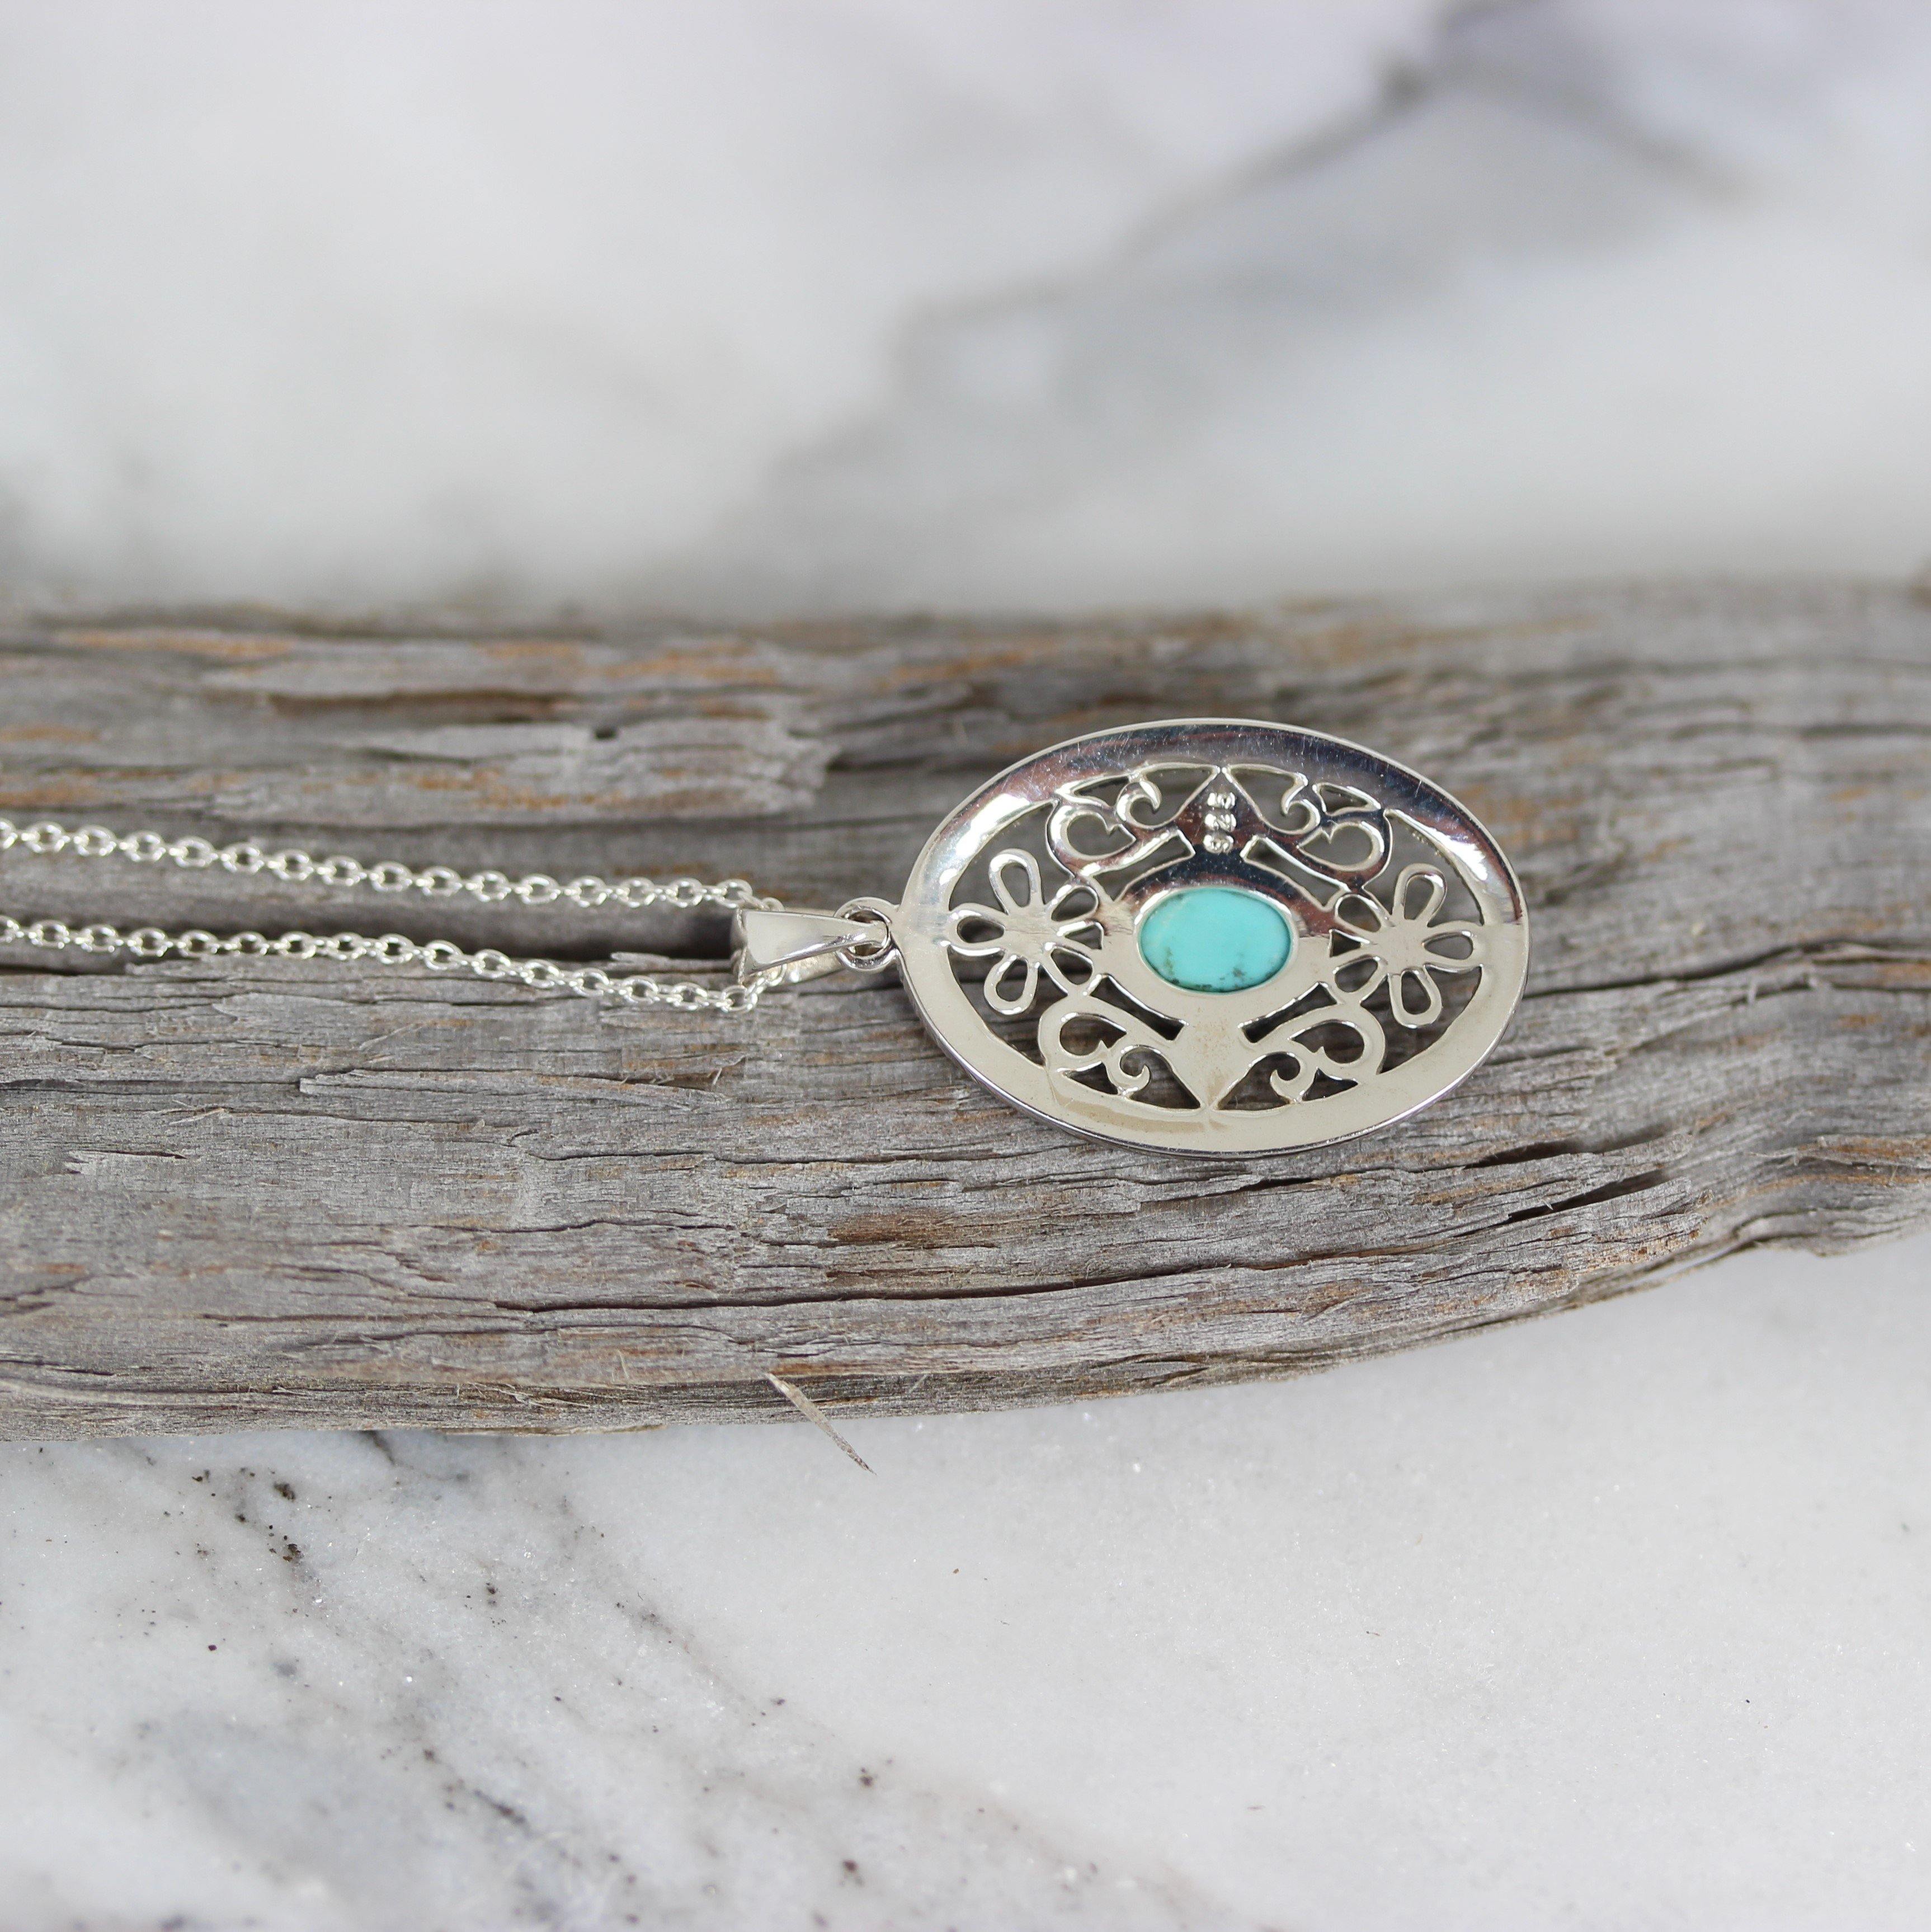 Sterling Silver Marcasite & Turquoise Oval Pendant Necklace 42cm - STERLING SILVER DESIGNS